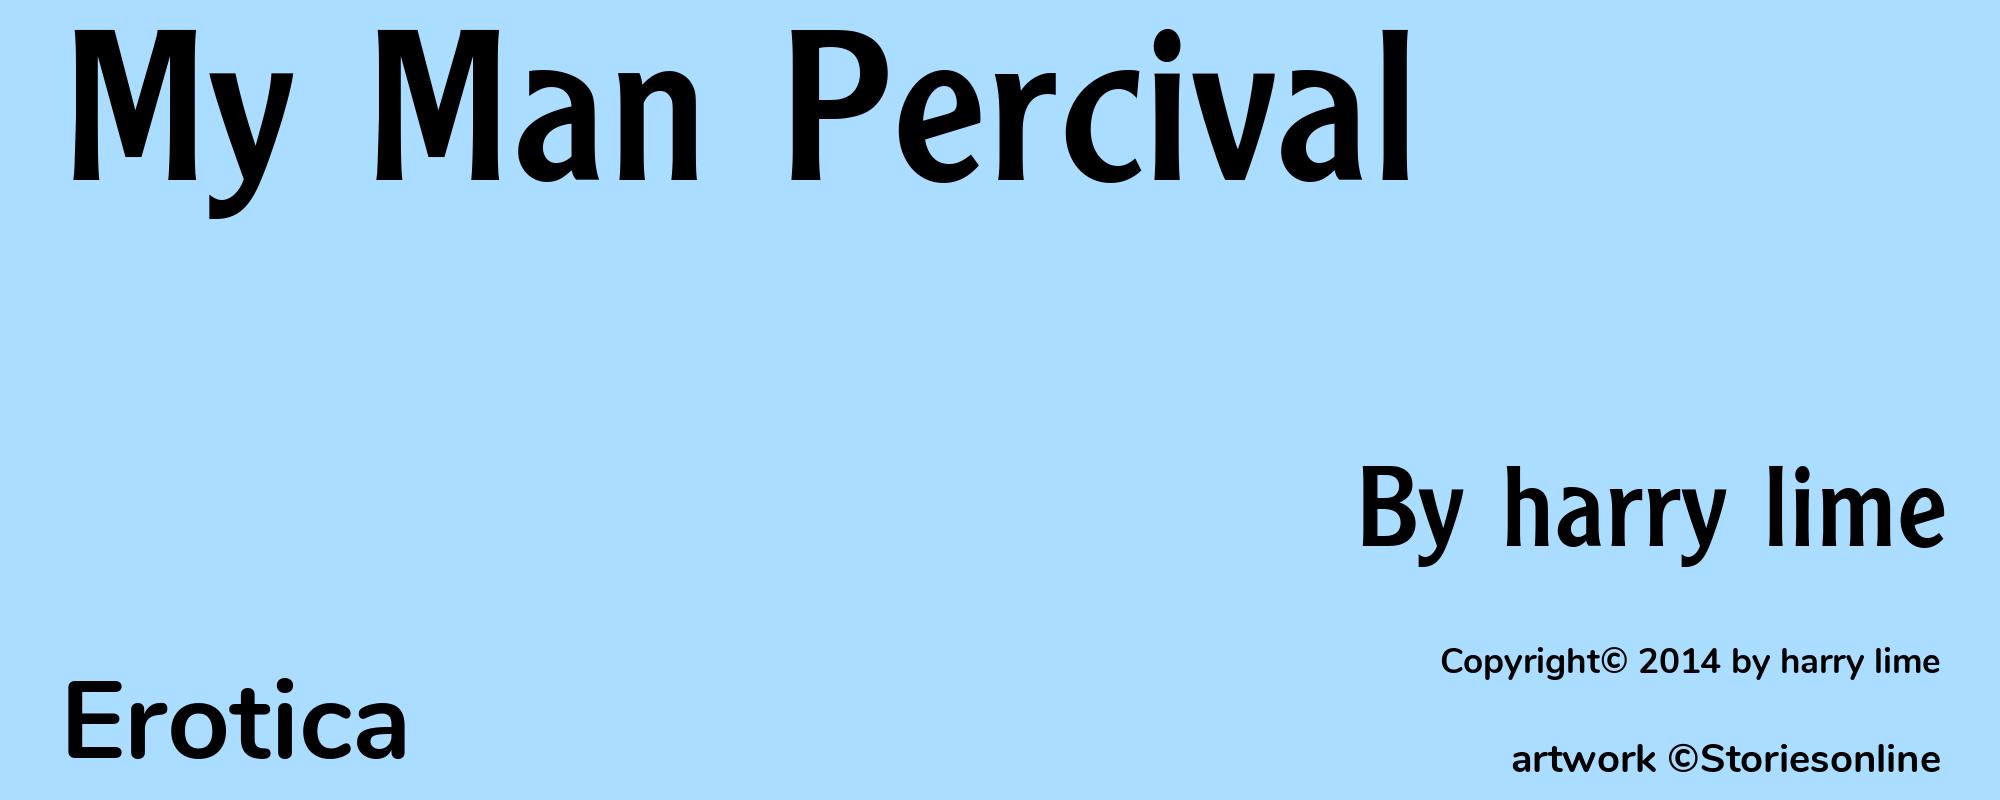 My Man Percival - Cover